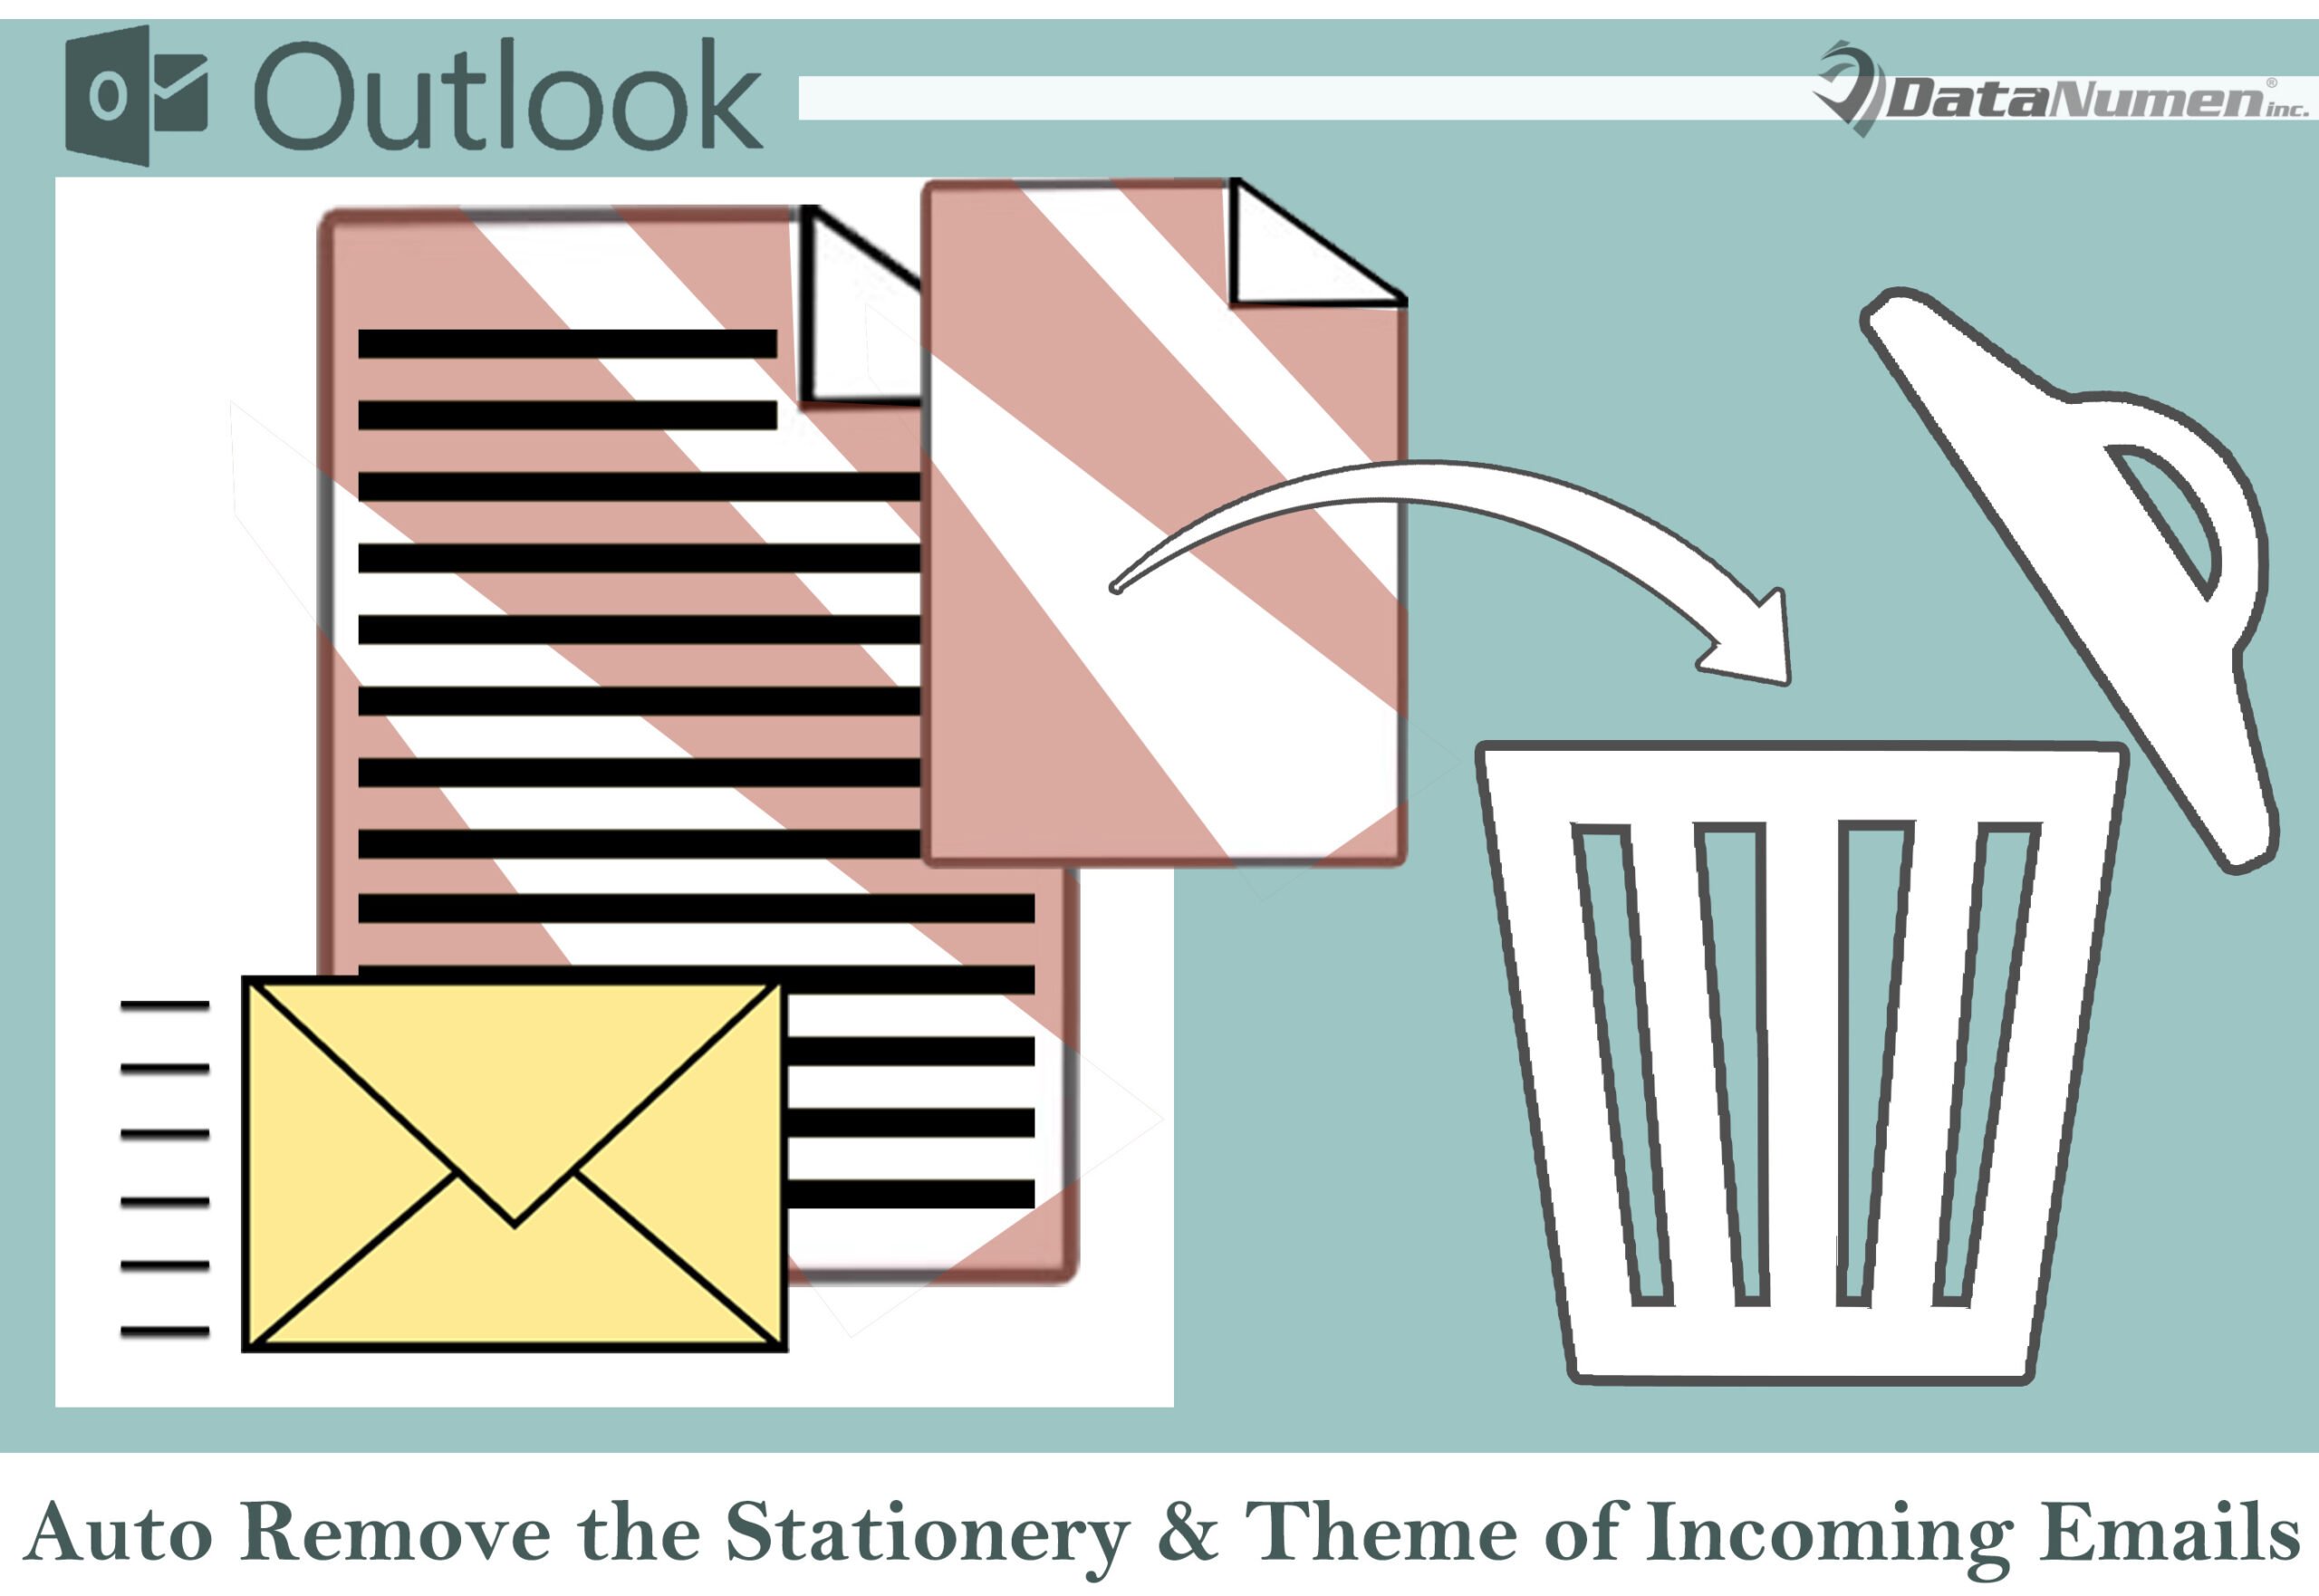 2 Methods to Auto Remove the Stationery & Theme of Incoming Emails in Your Outlook